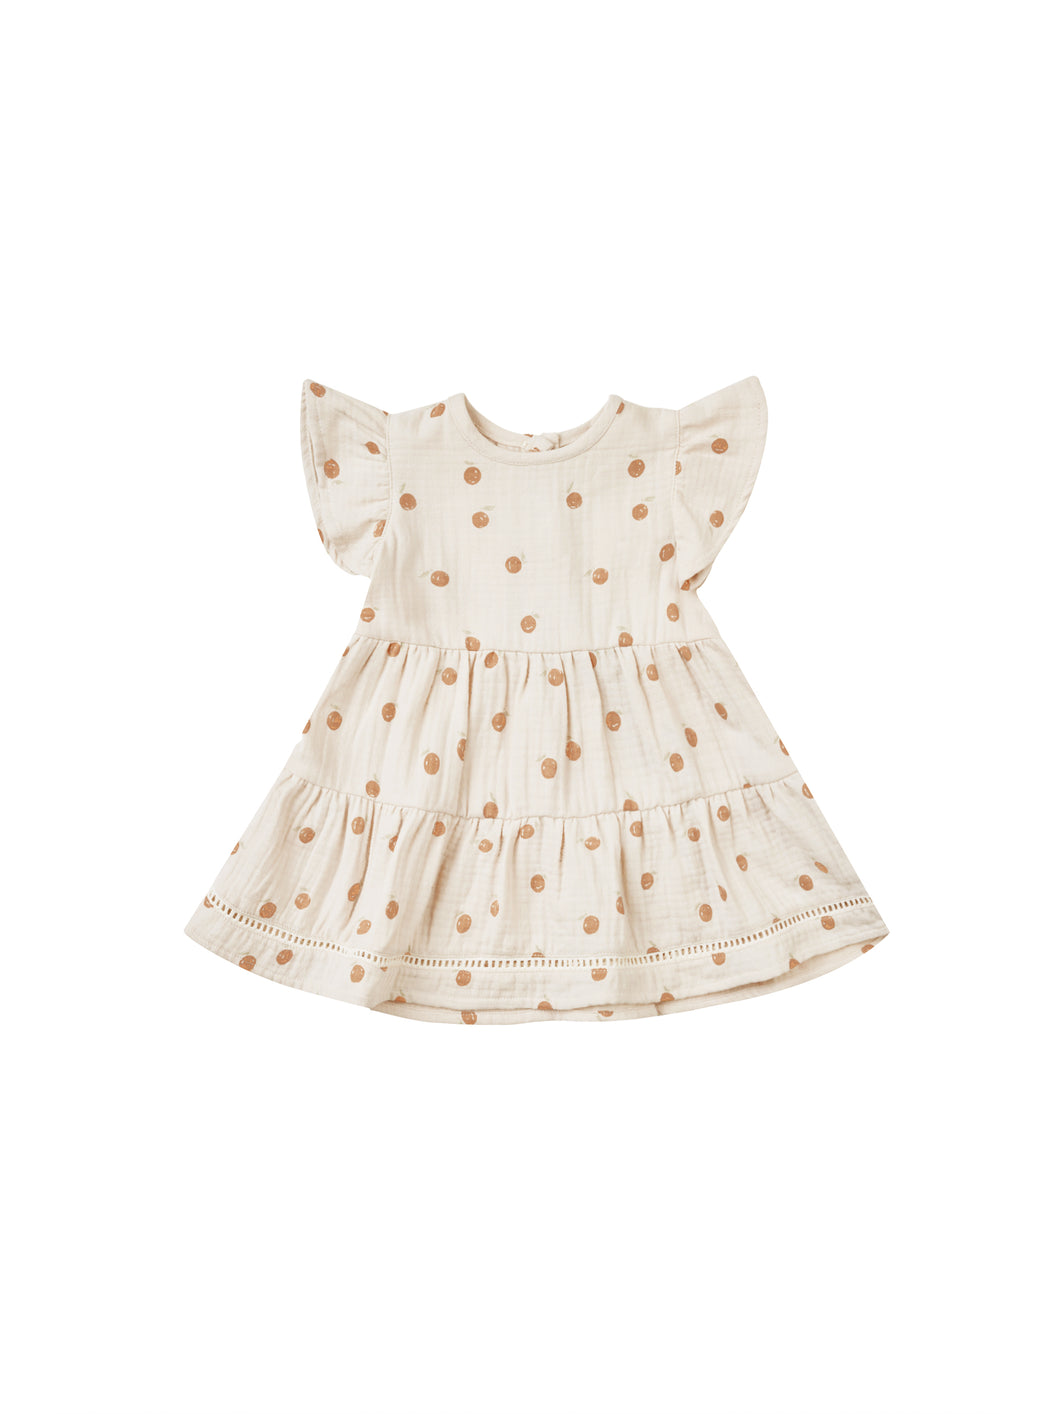 Beige coloured baby dress with ruffle sleeves and three tiers on the skirt. This dress features an oranges all over print. 